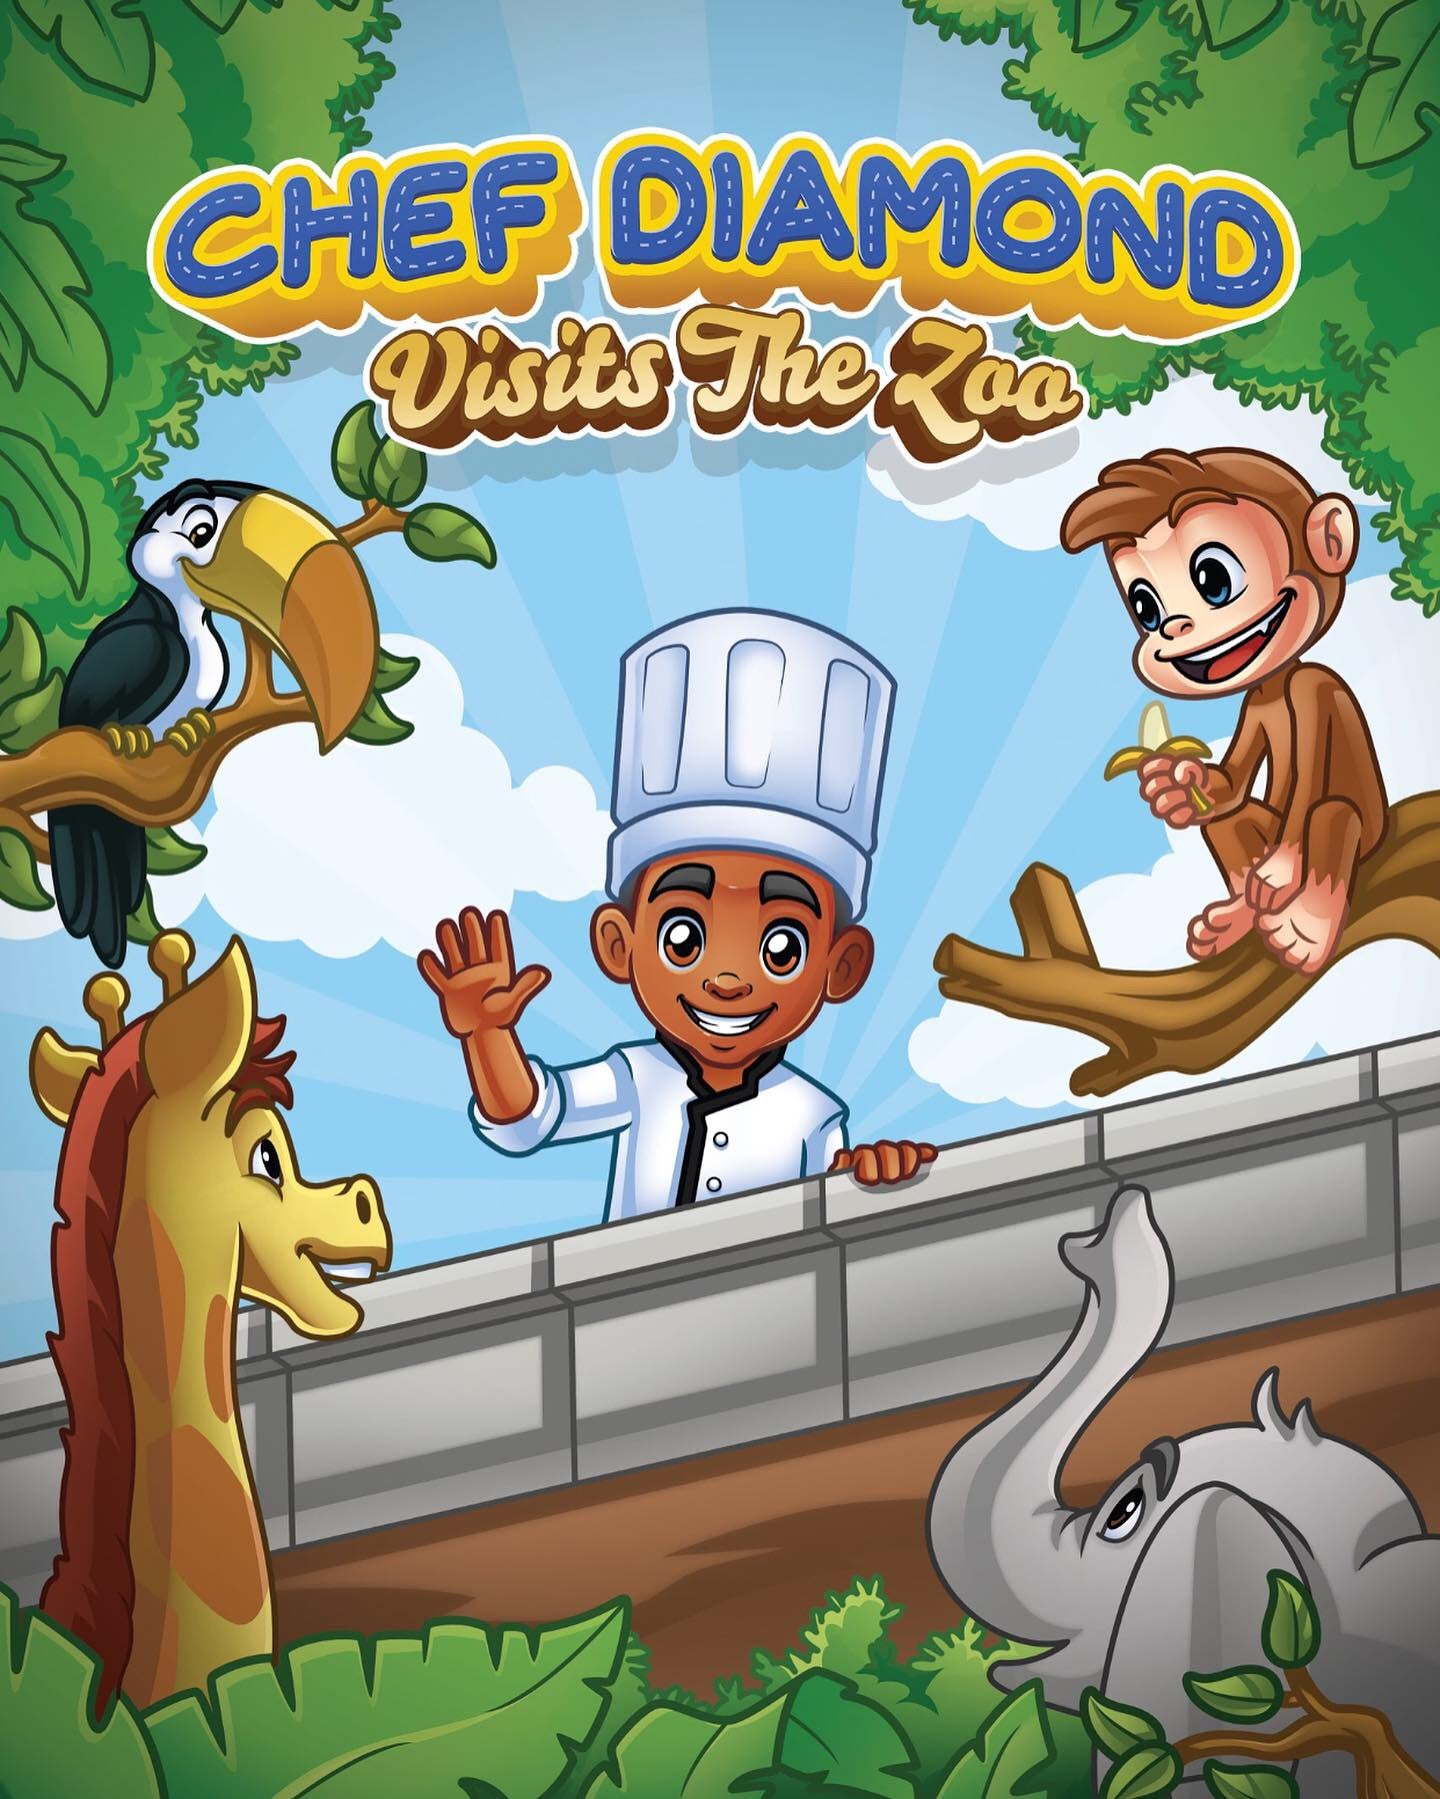 Chef Diamond Visits The Zoo - Coloring Book